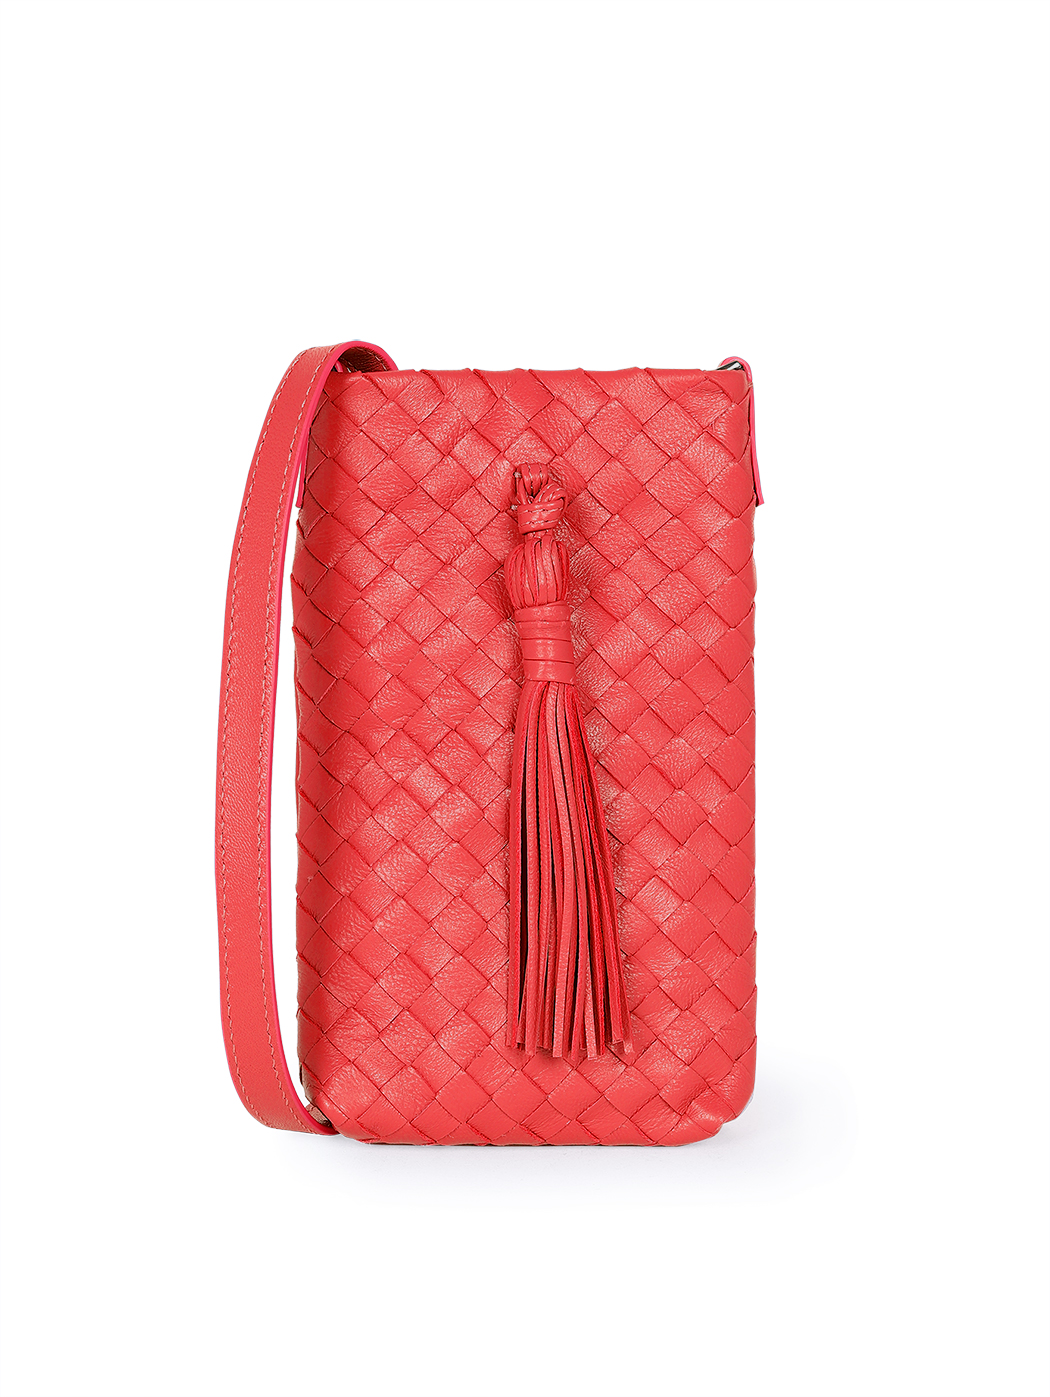 Crossbody Phone Bag Woven Leather Red